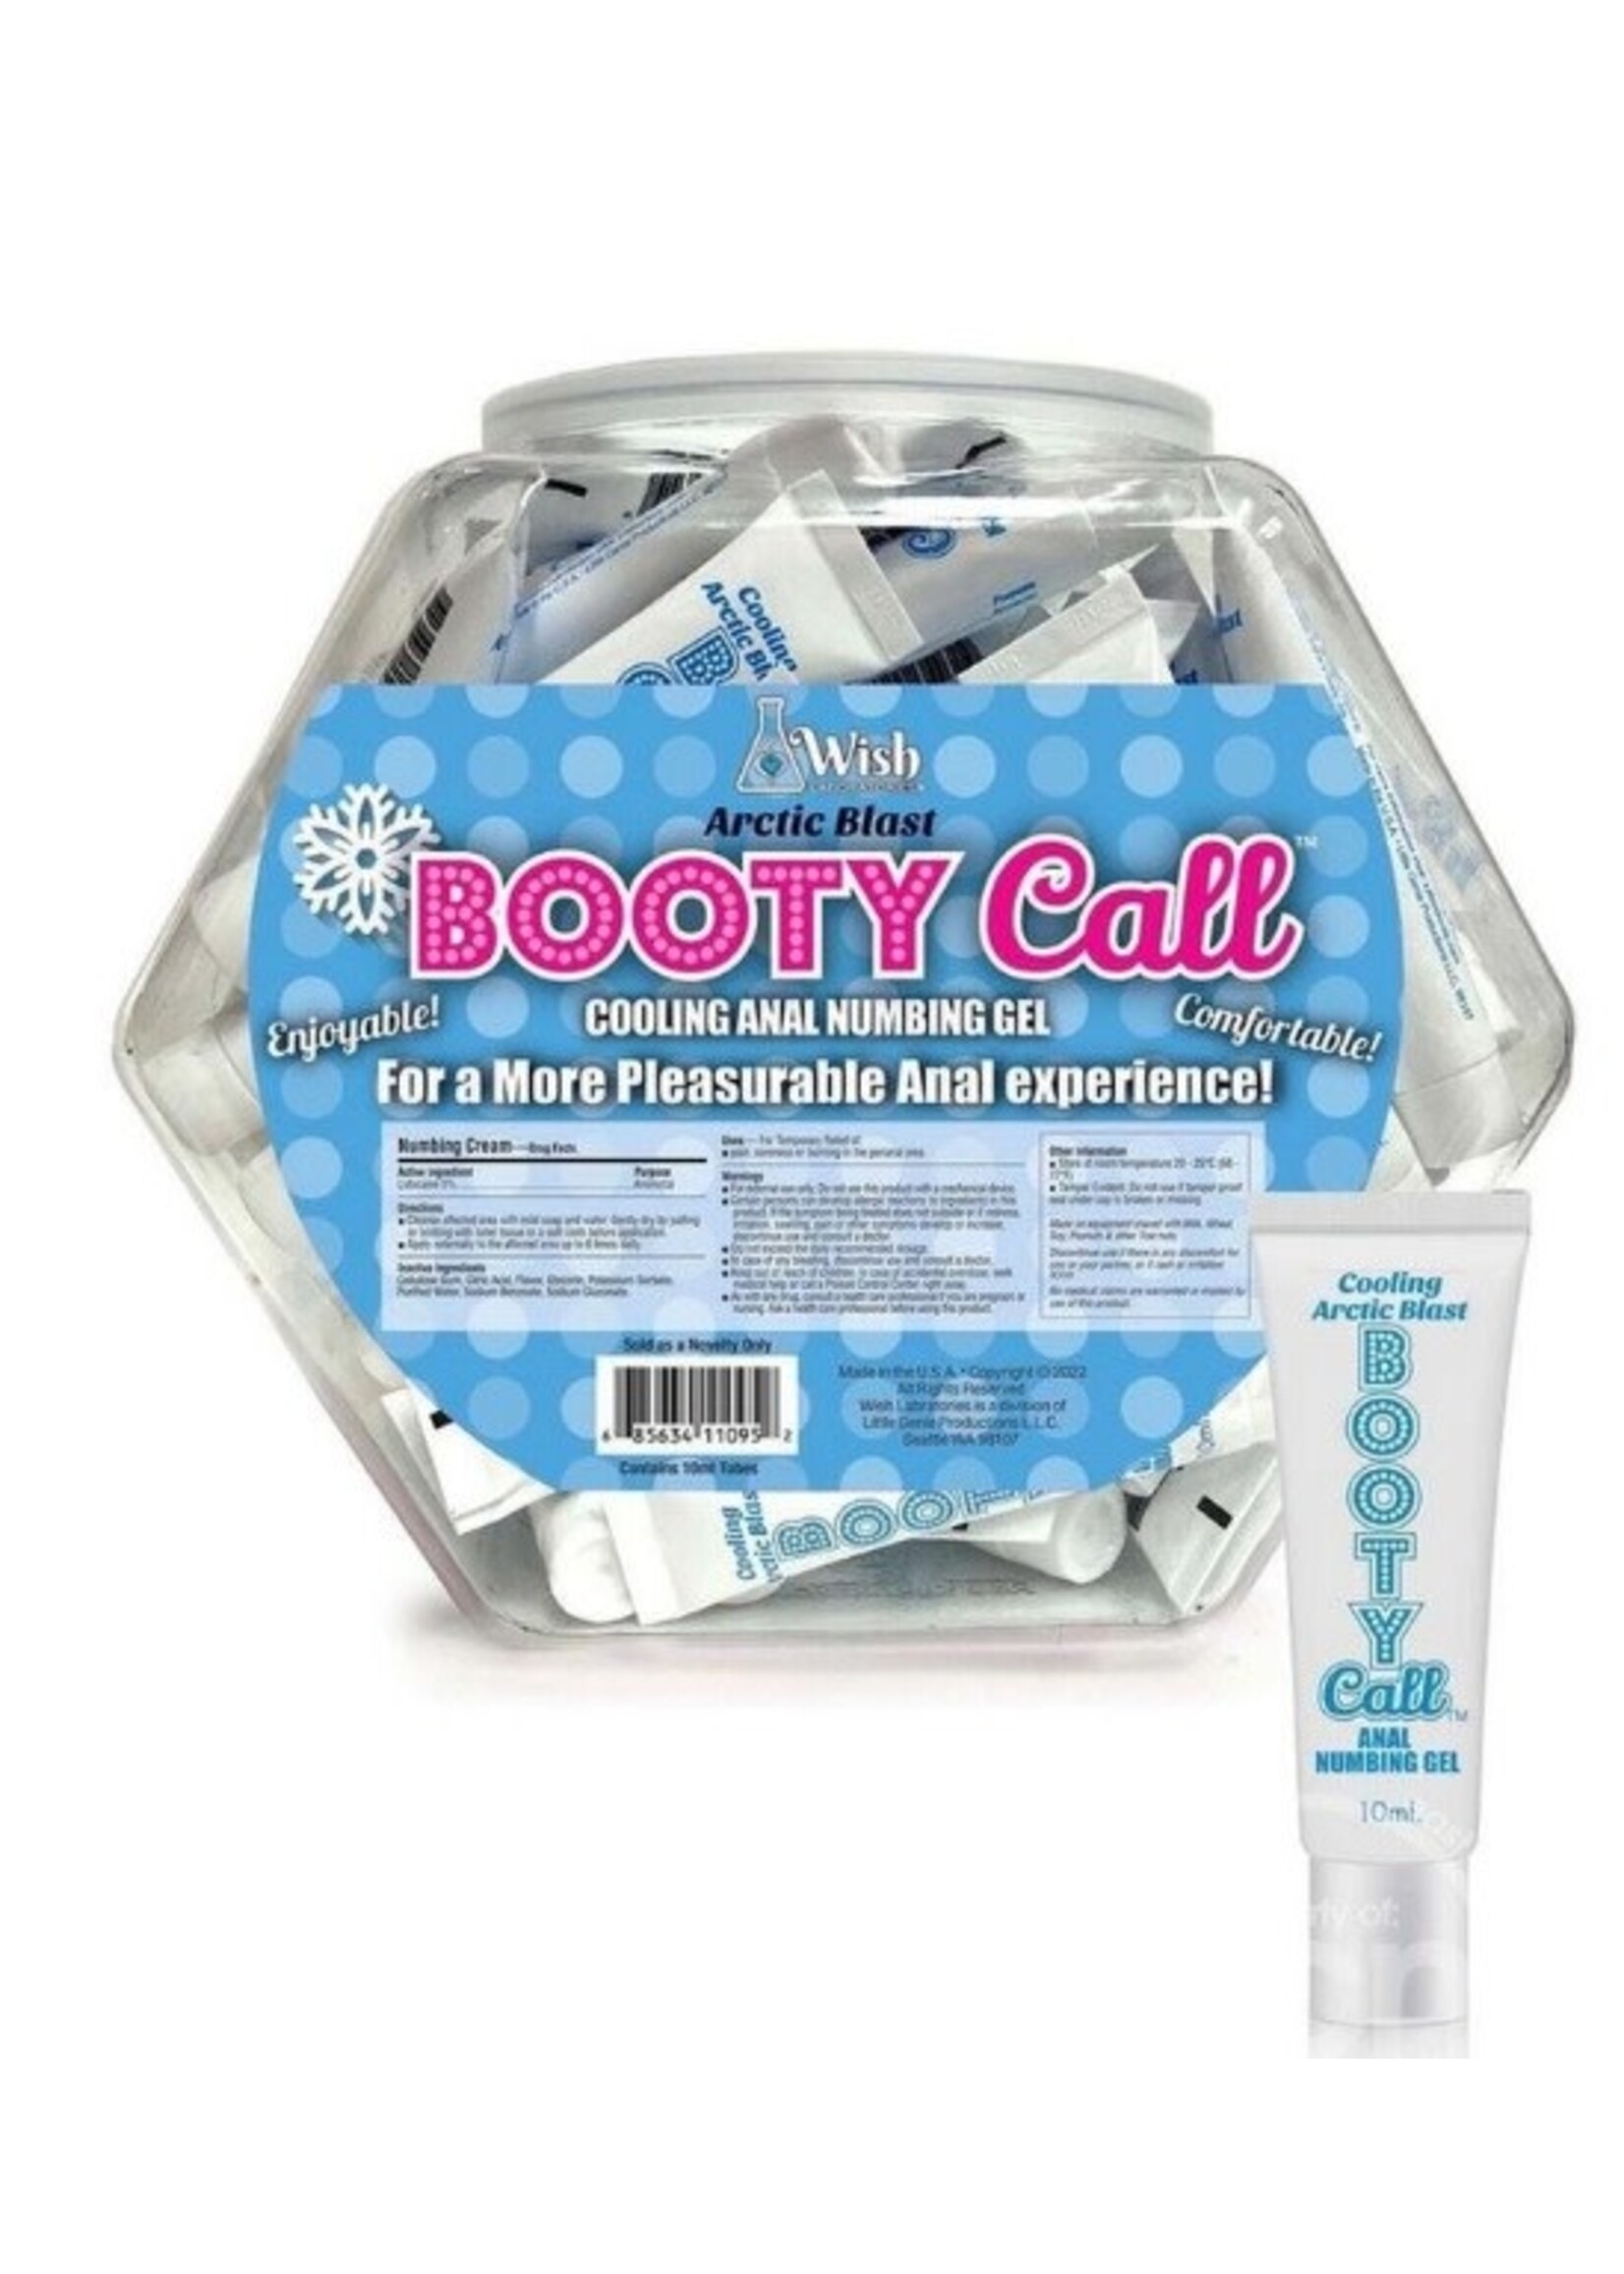 Booty Call Cooling Anal Numbing Gel 10ml